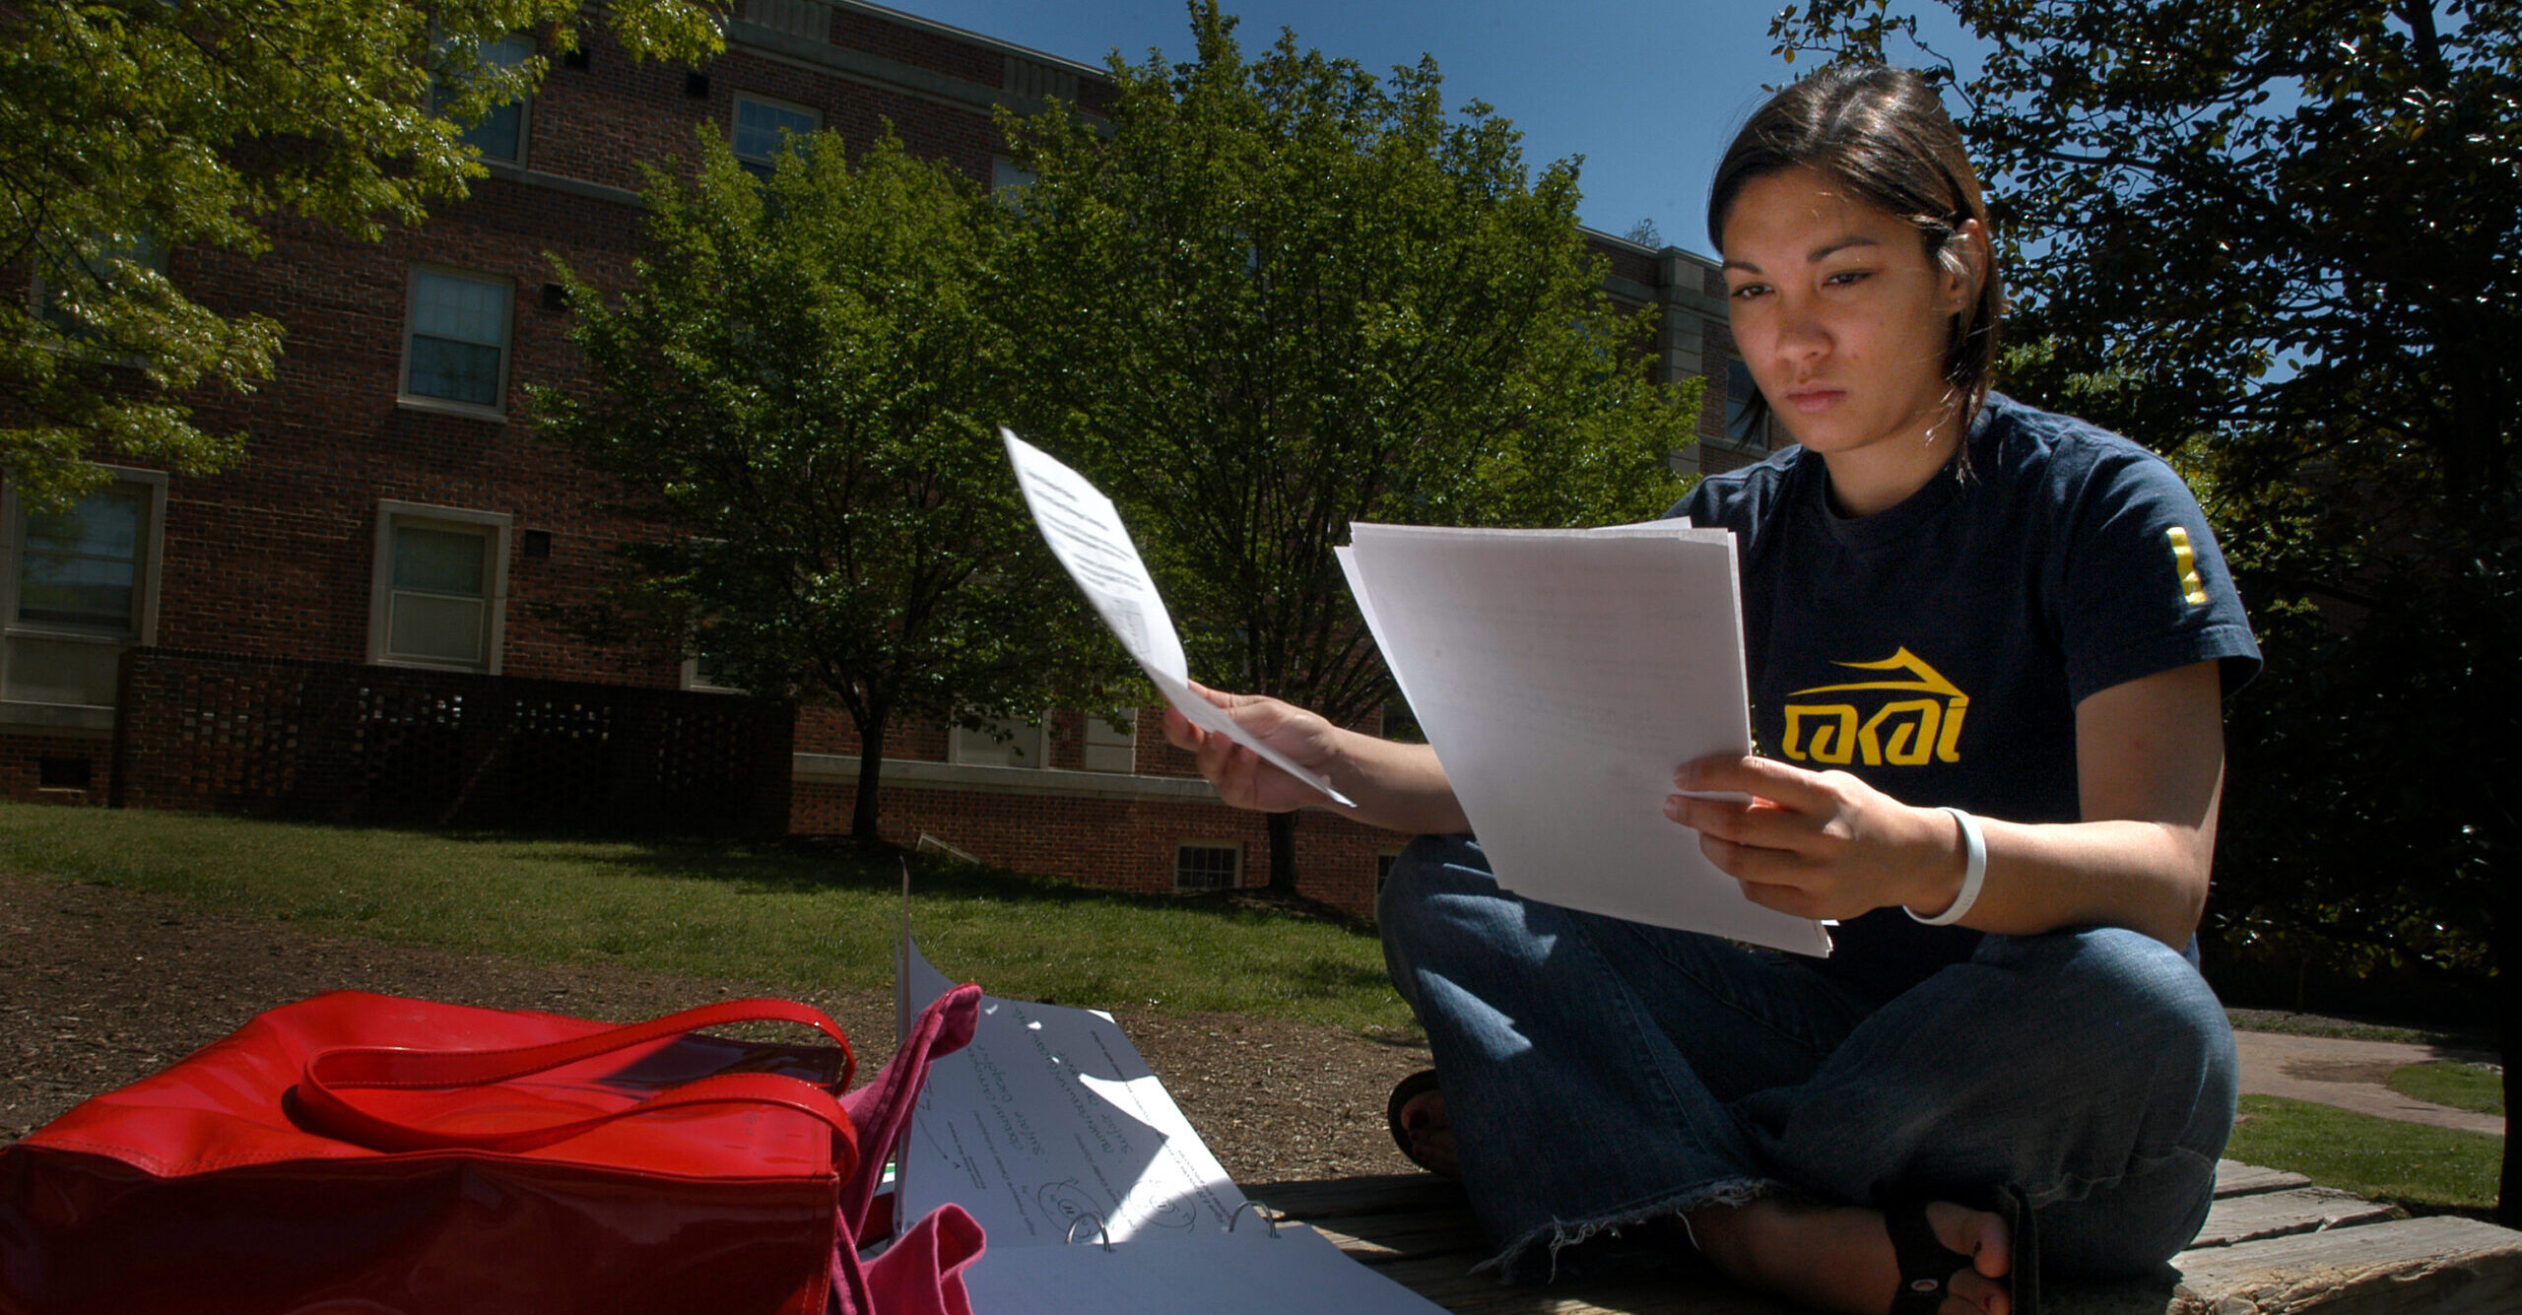 Student studies on a bench outside.